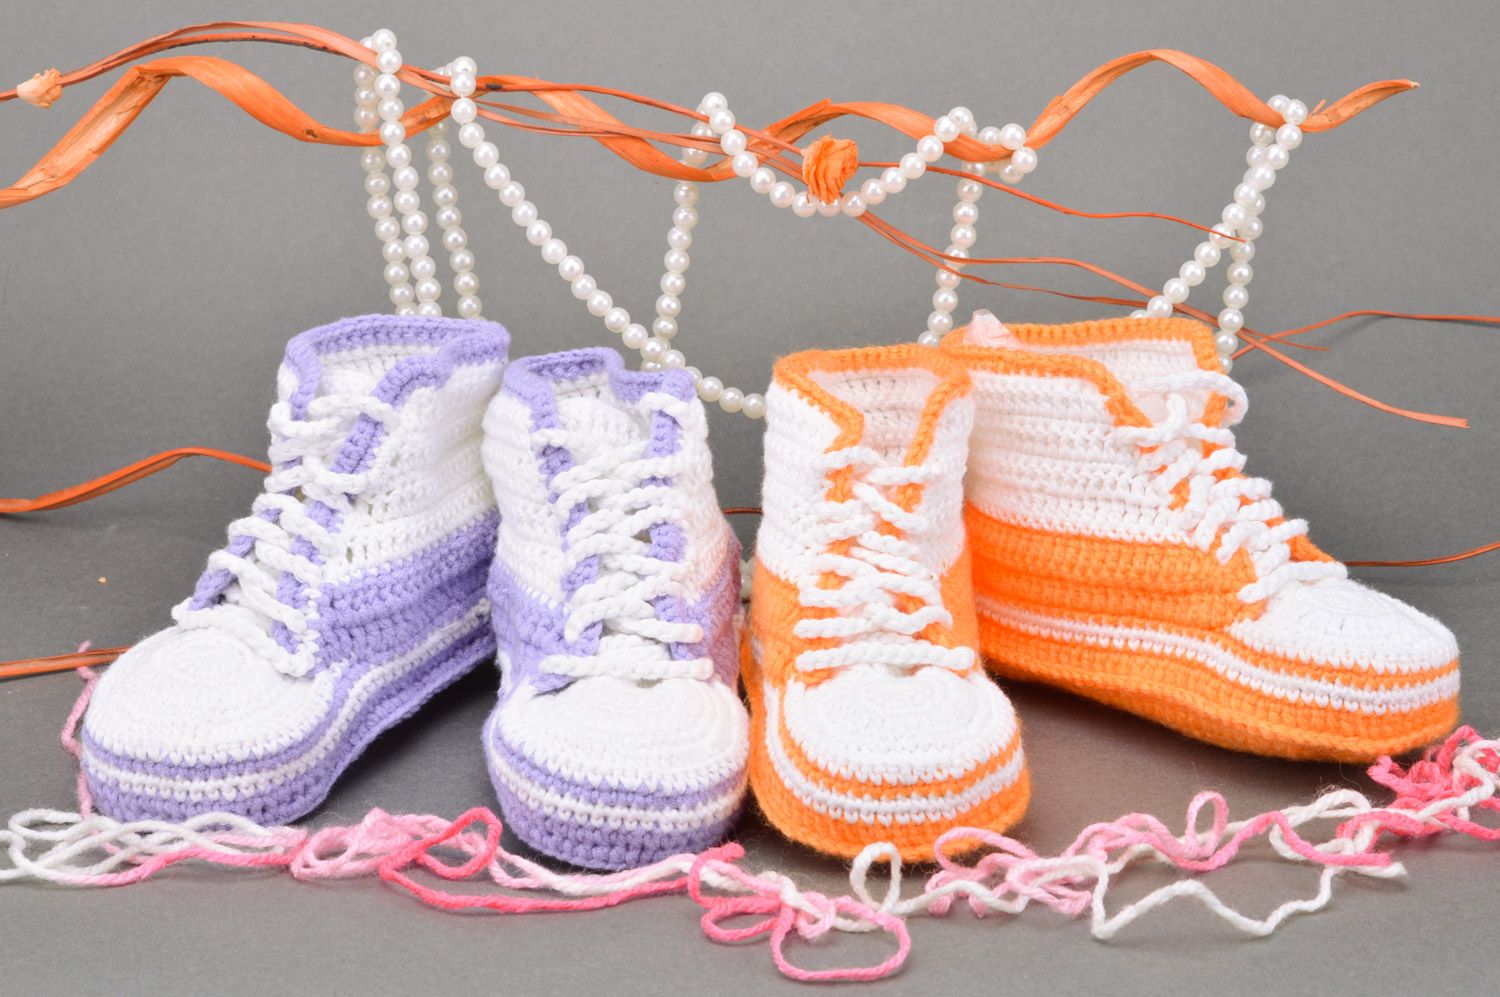 Handmade crocheted baby booties set of 2 pairs in orange and purple colors photo 1